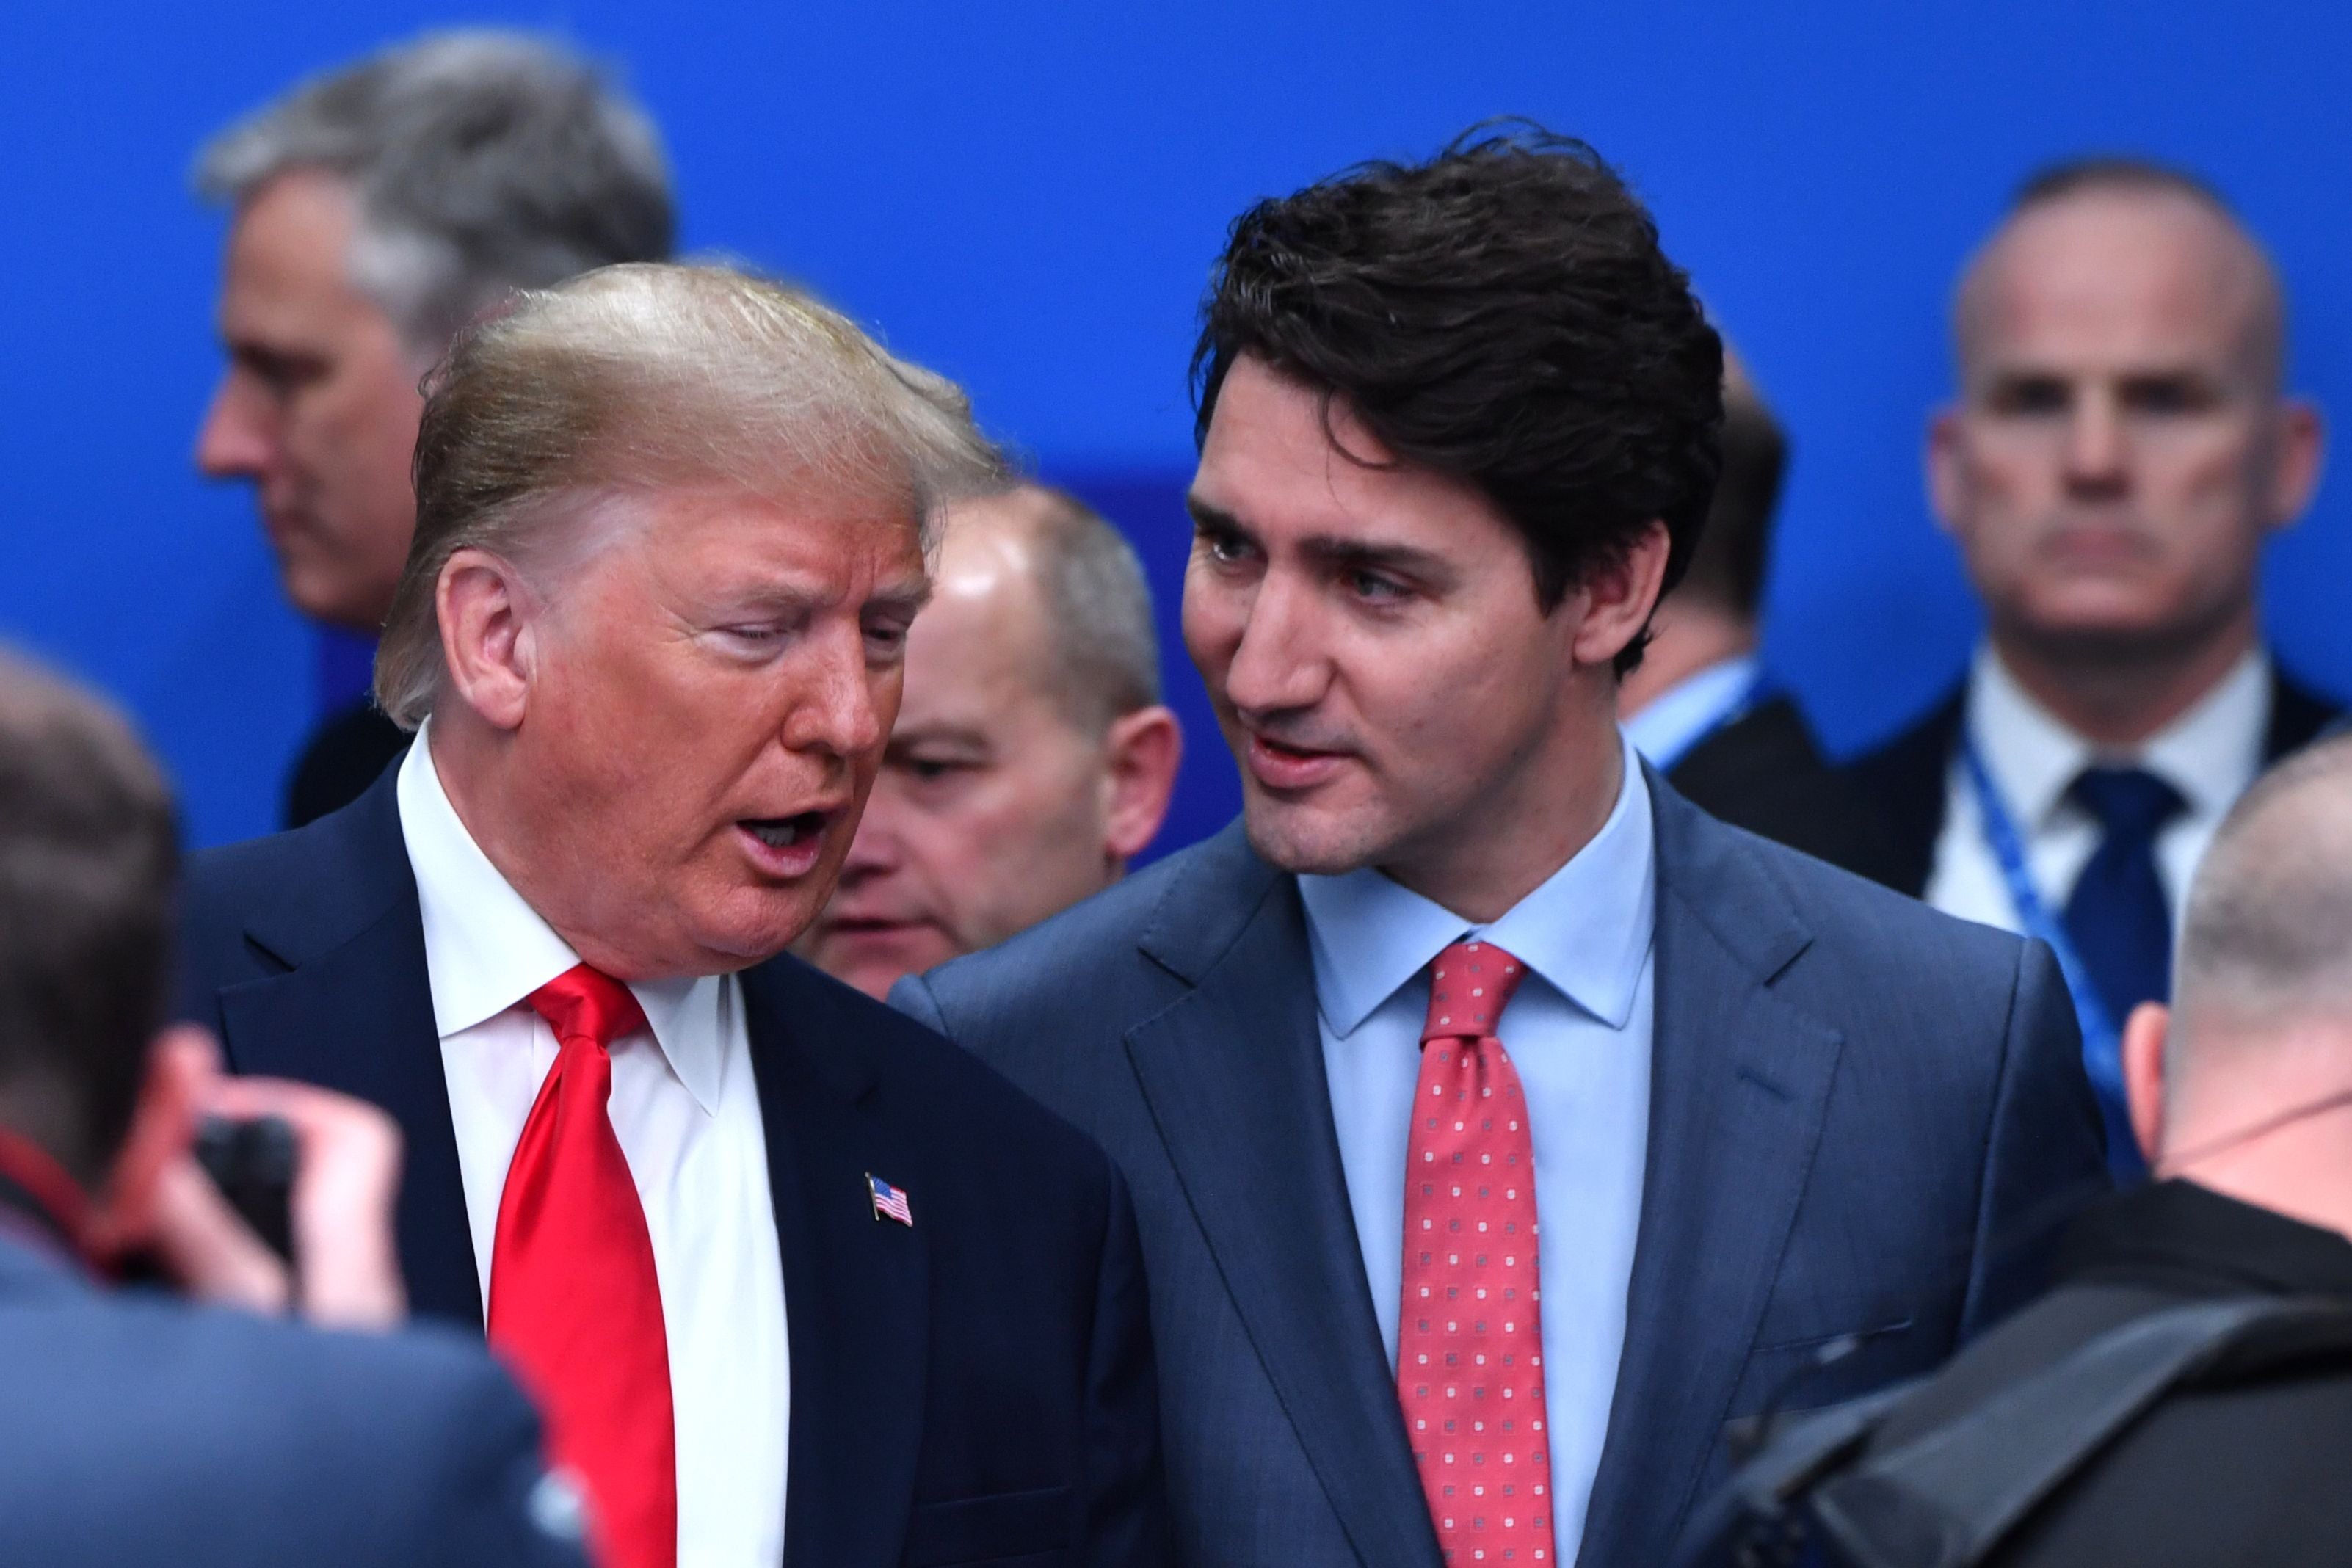 Then-president Donald Trump talks with Canada’s Prime Minister Justin Trudeau during the plenary session of the NATO summit in 2019